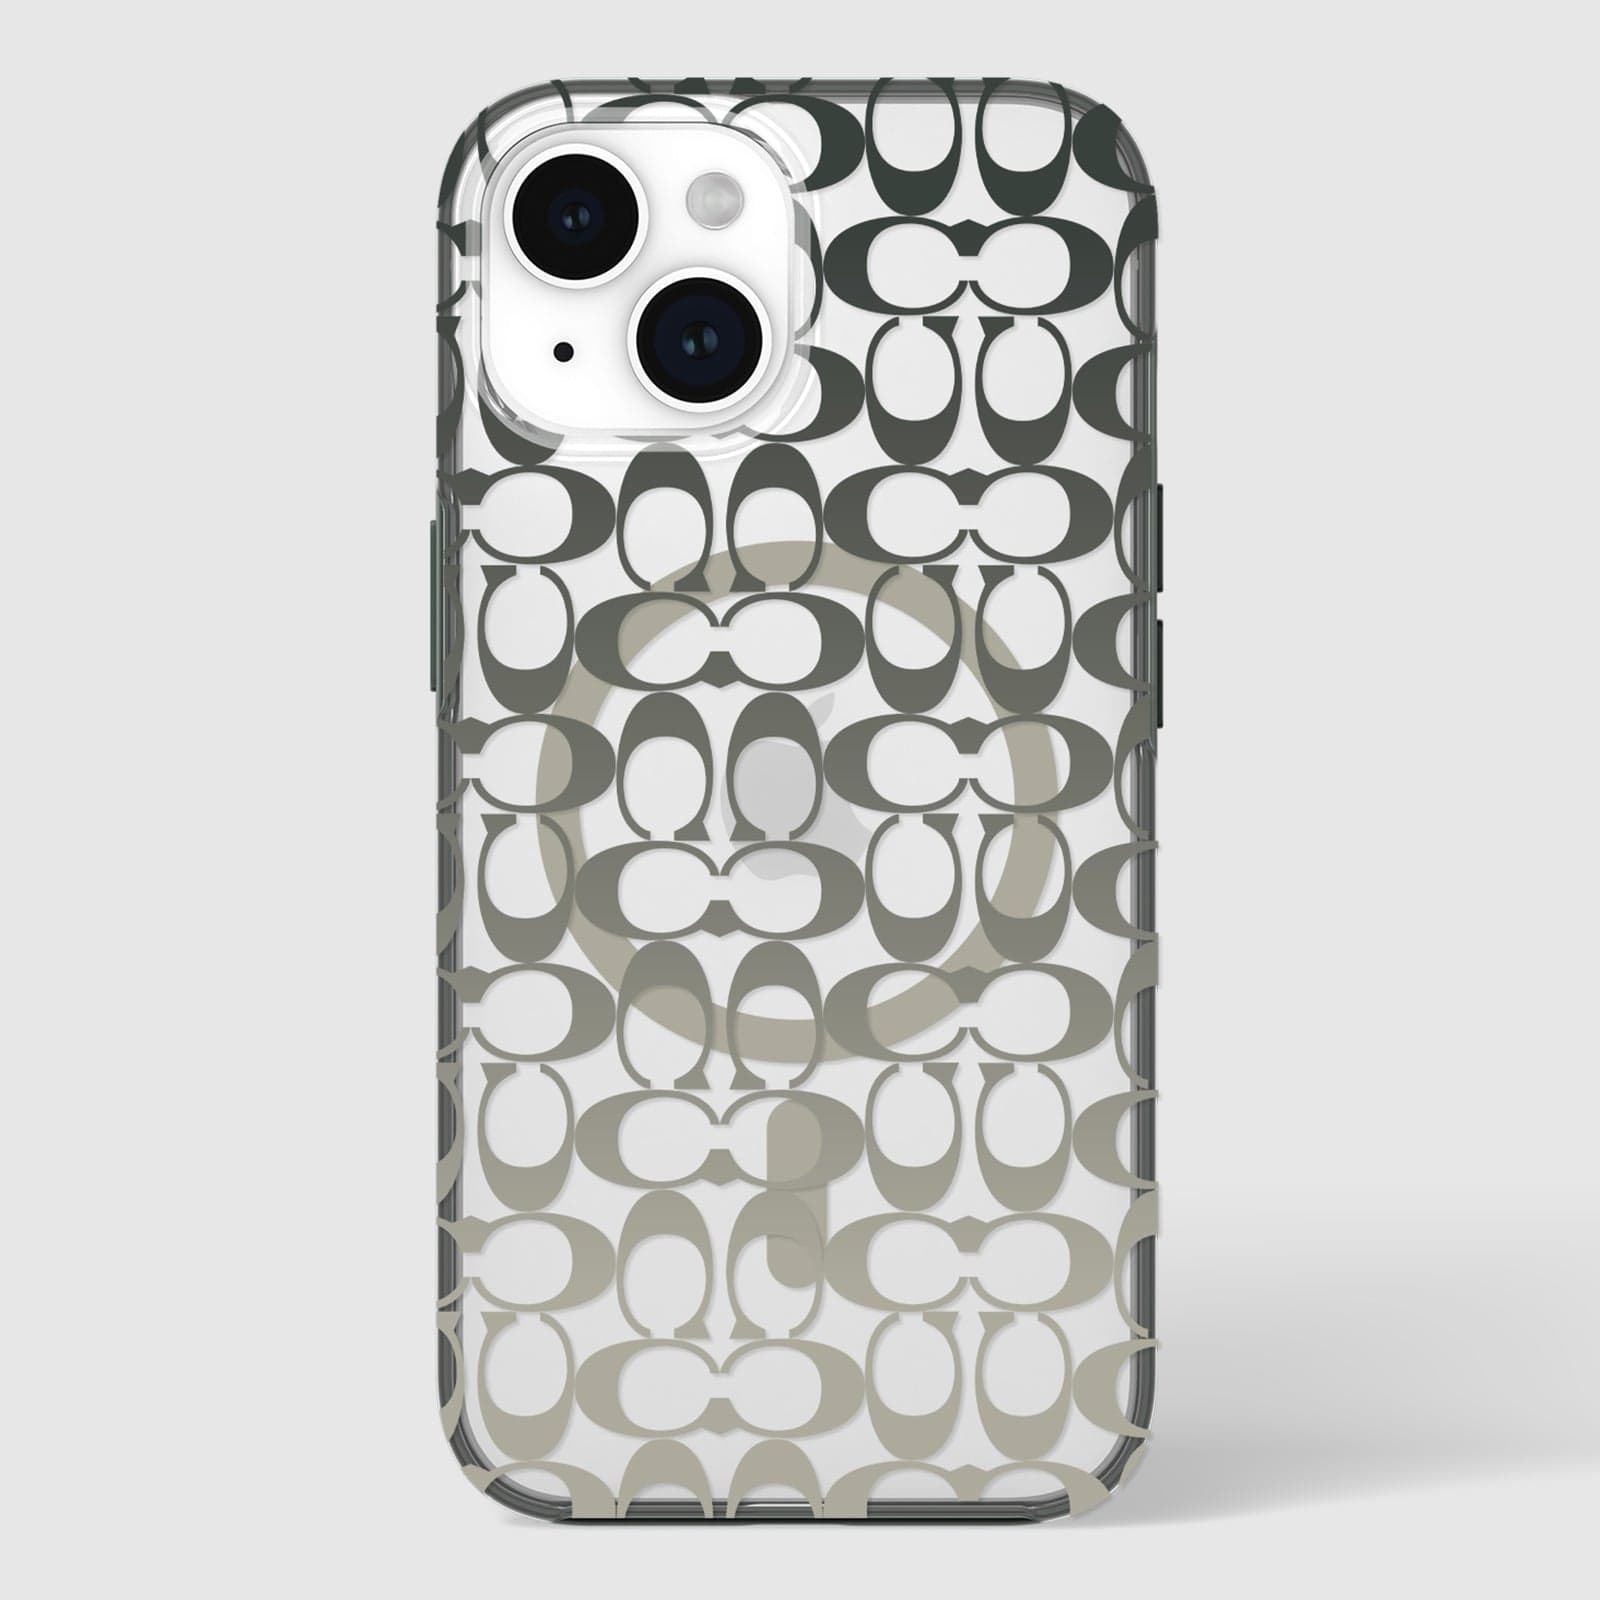 Coach Protective Case for AirPods Pro, Styled with Signature Coach Designs  | Shop Now